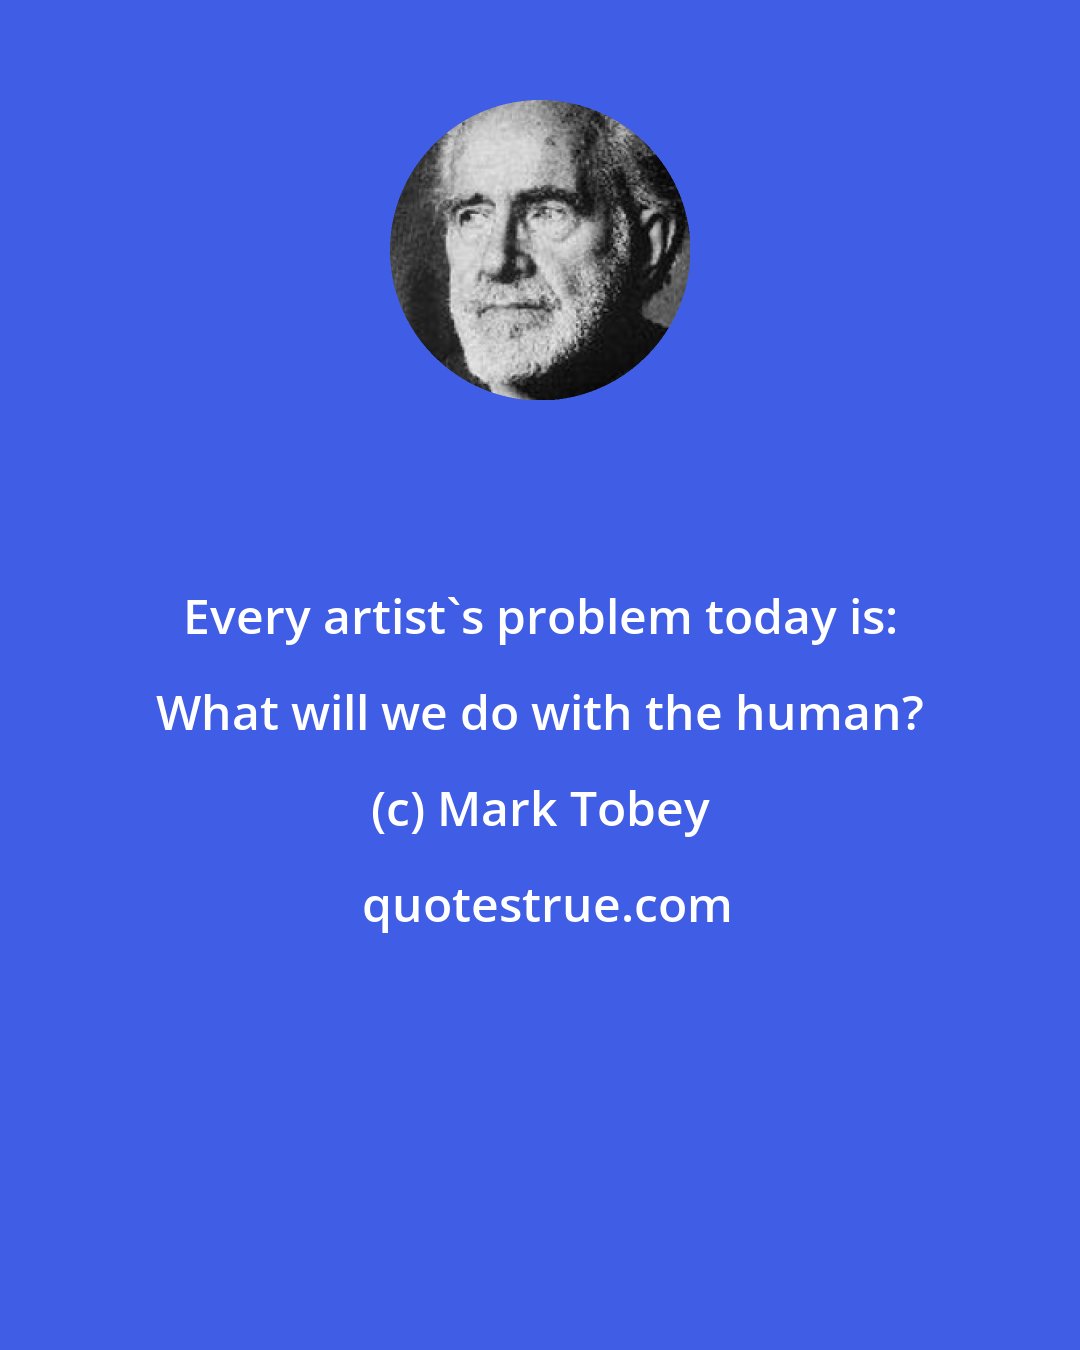 Mark Tobey: Every artist's problem today is: What will we do with the human?